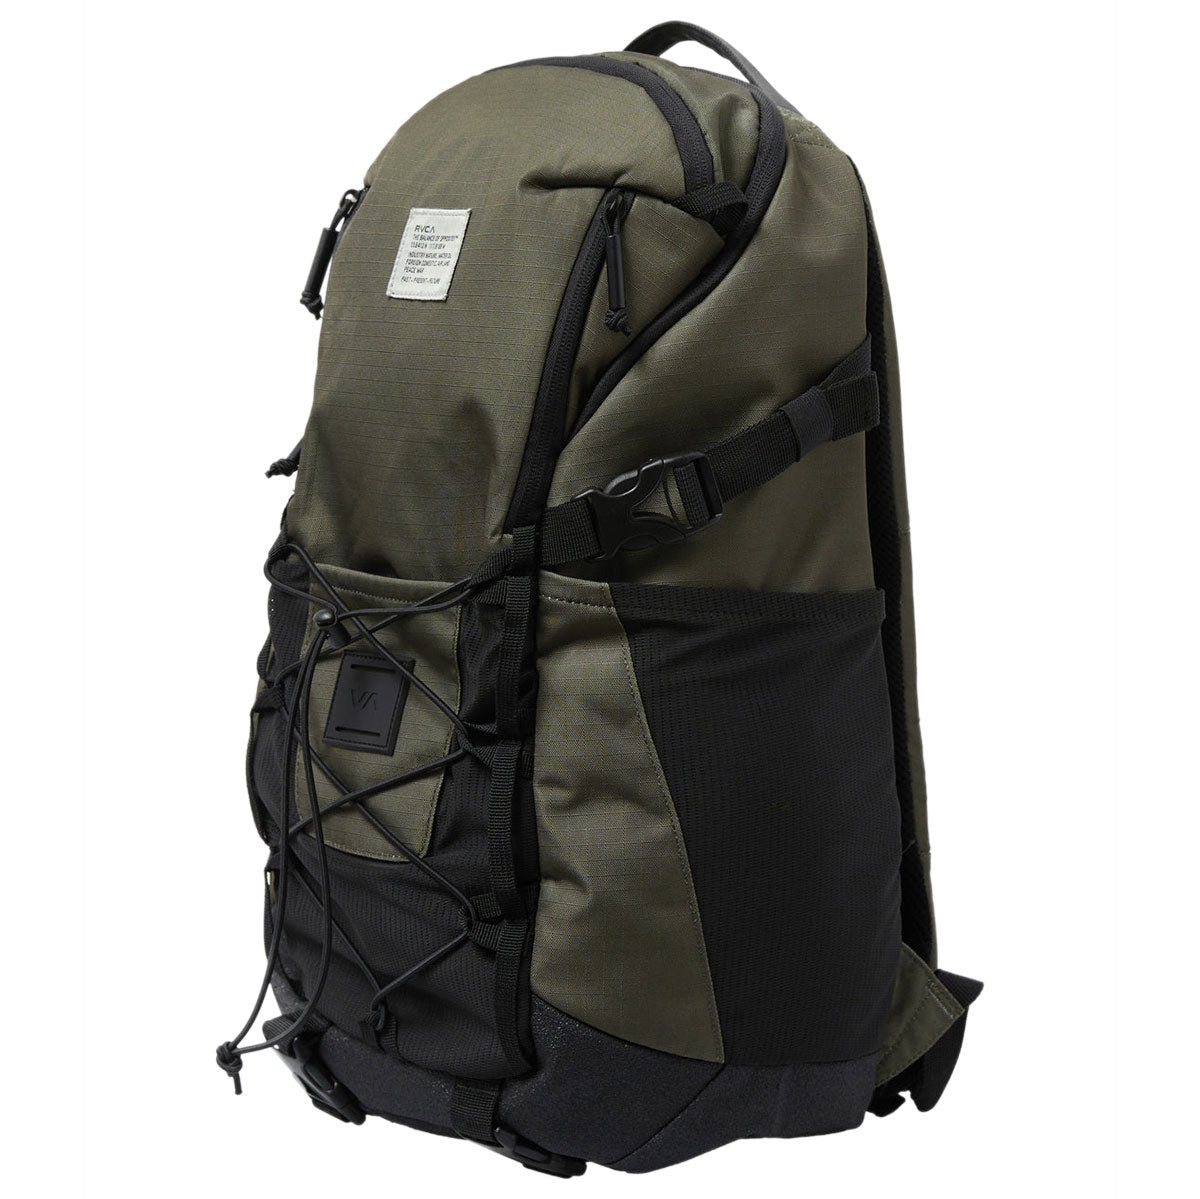 RVCA Rvca Daypack Backpack - Olive image 3